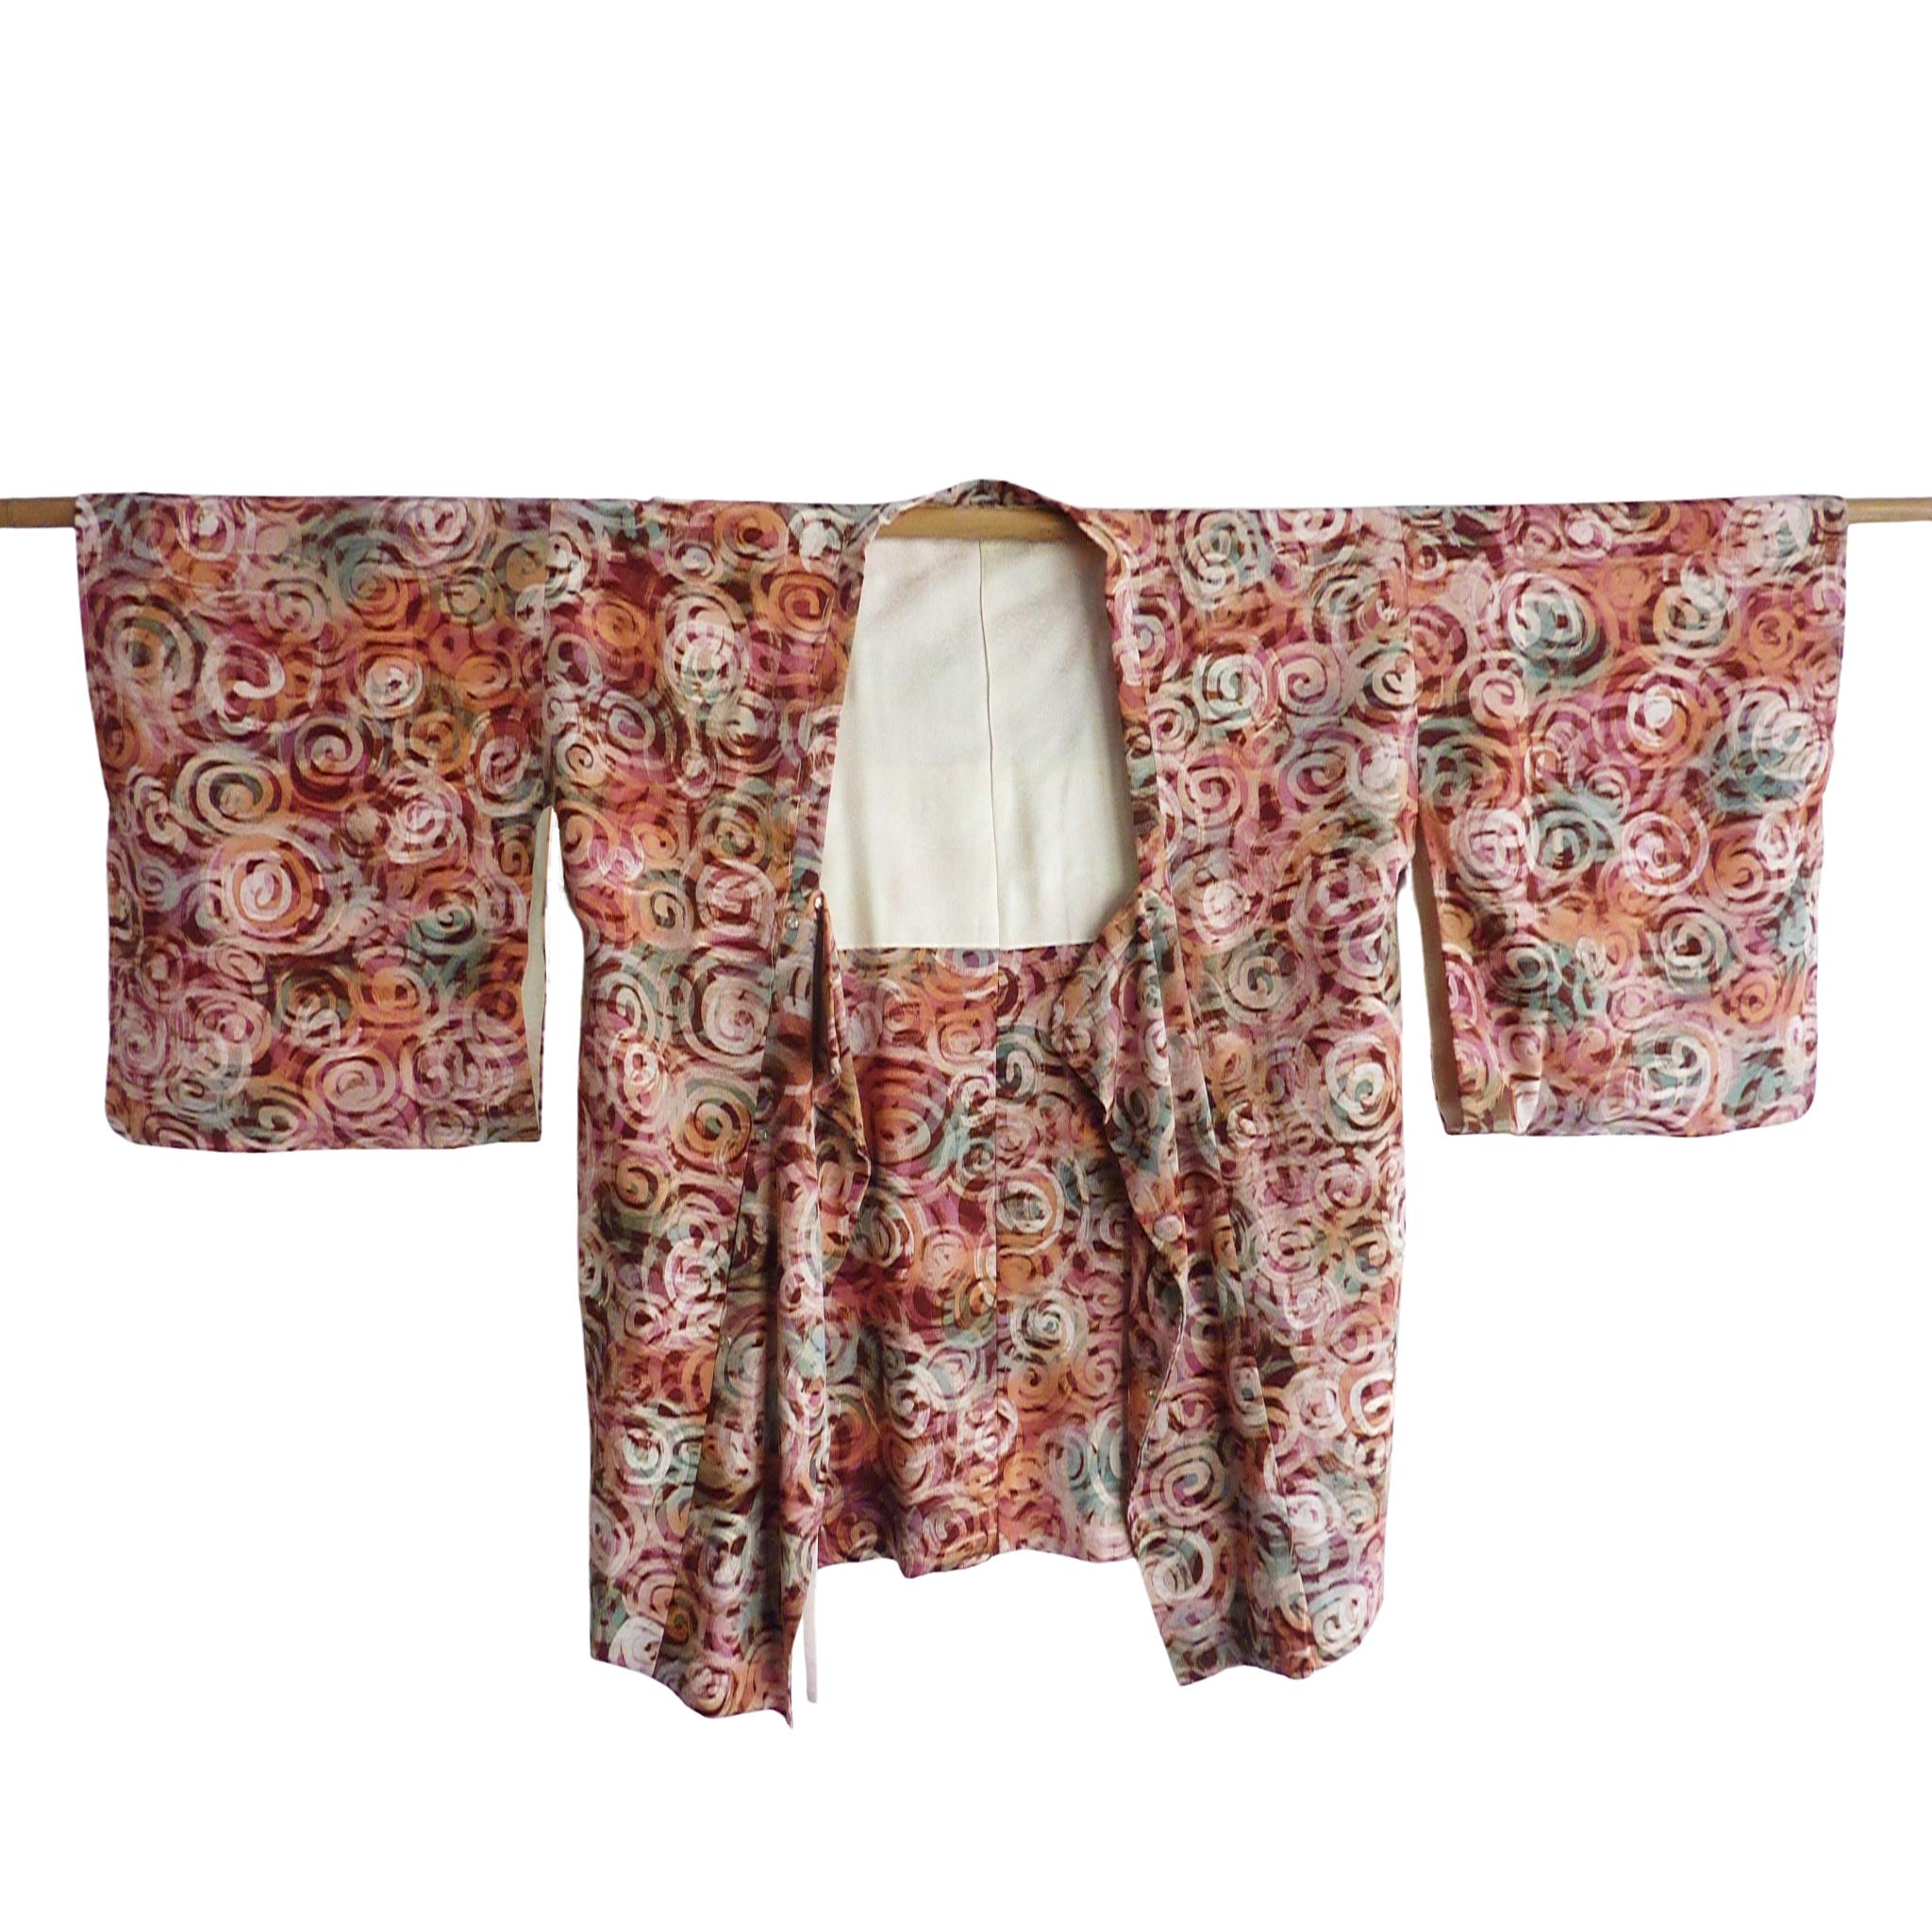 Rare kimono with buttons and deep sleeve drop.
Circa: 1920s
Place of Origin: Japan
Material: Silk. Lined in silk jacquard.
Some loose threads. 
Total length 34